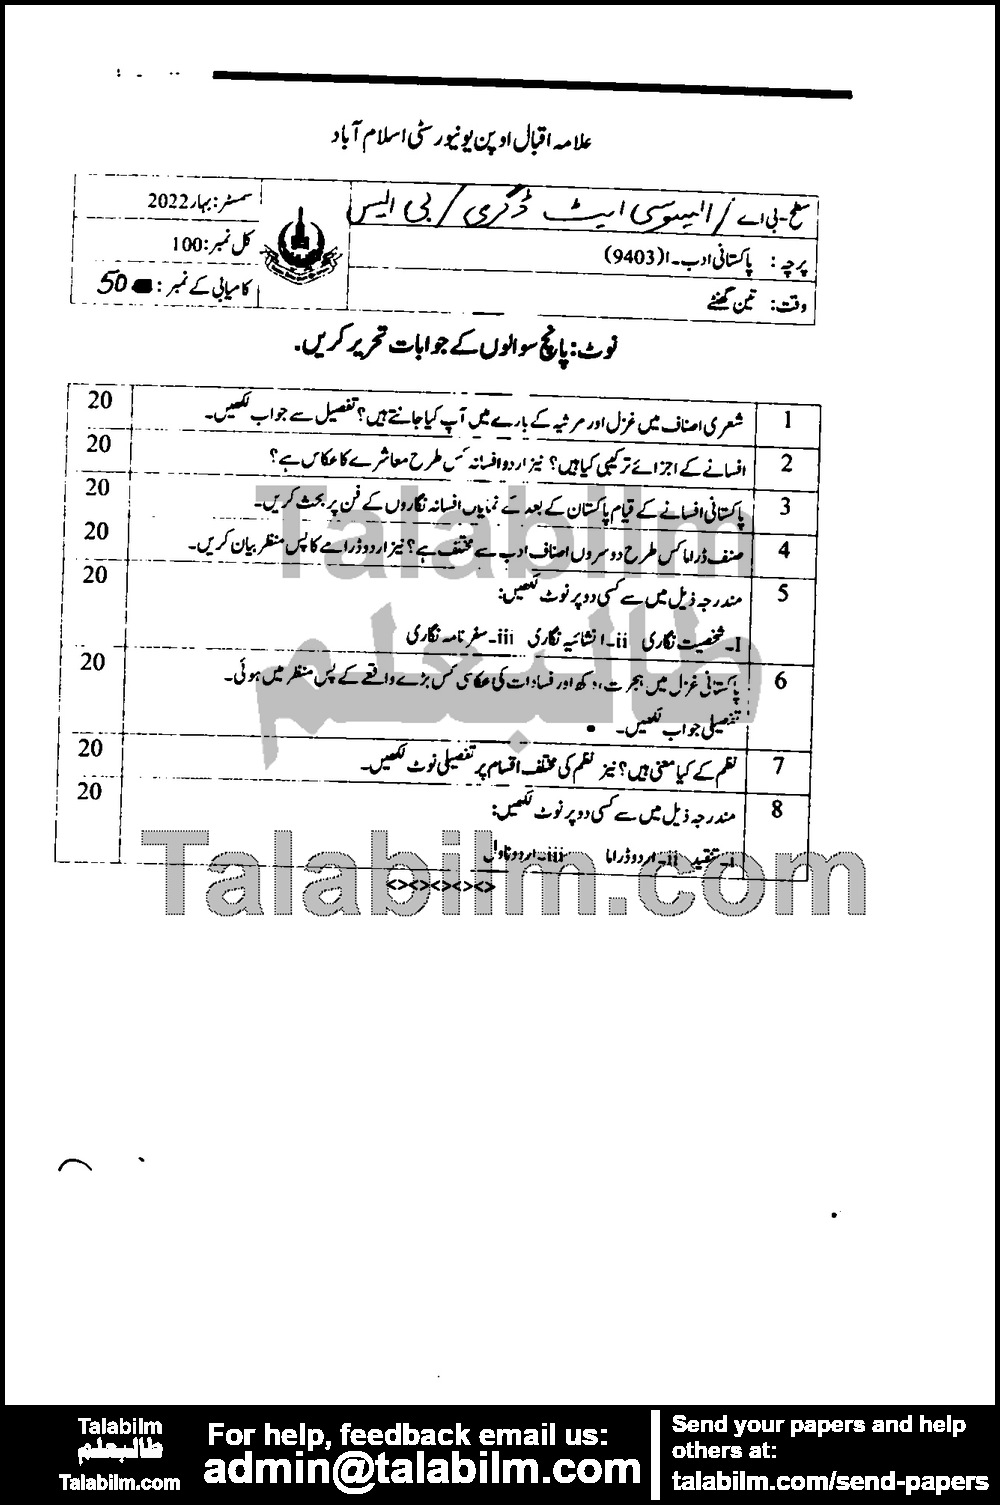 Pakistani Adab-I (ODL) 9403 past paper for Spring 2022